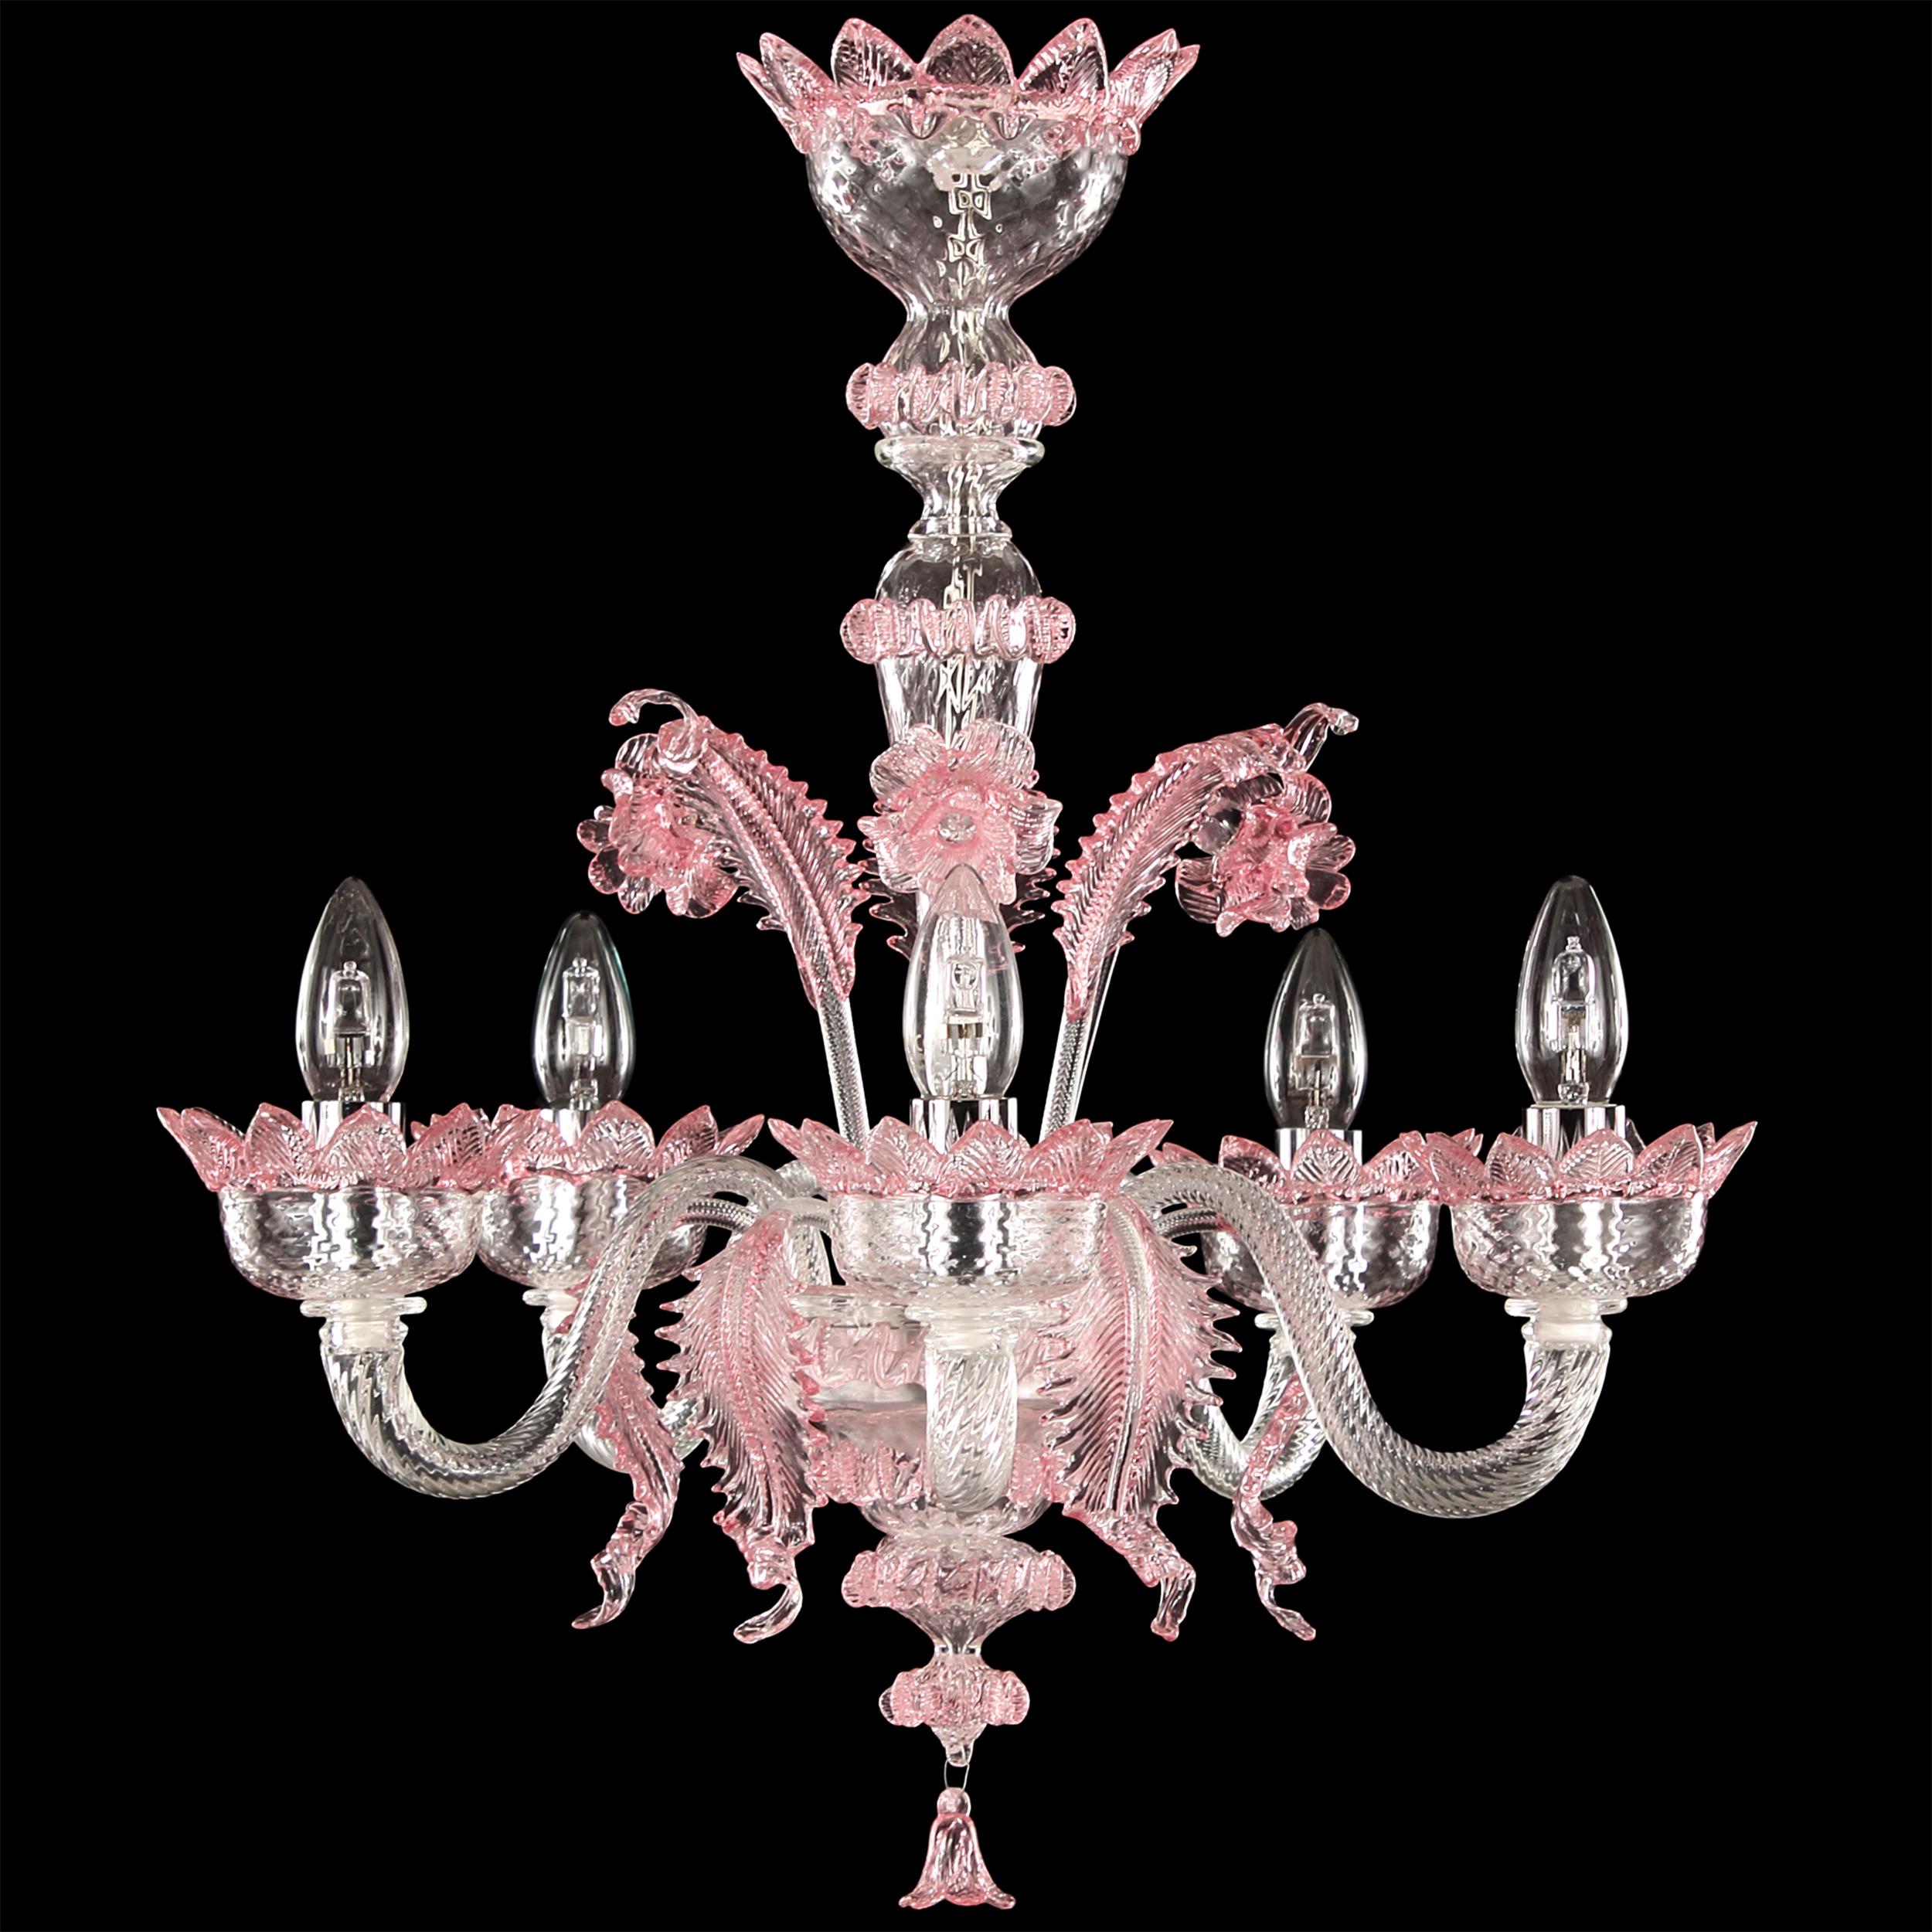 Classic Chandelier 5 Arms clear and pink Murano Glass by Multiforme.
The classic Murano glass chandelier, as it is in the collective imagination. As many other chandeliers in our collections, V-Classic 800 is designed with attention to details, and